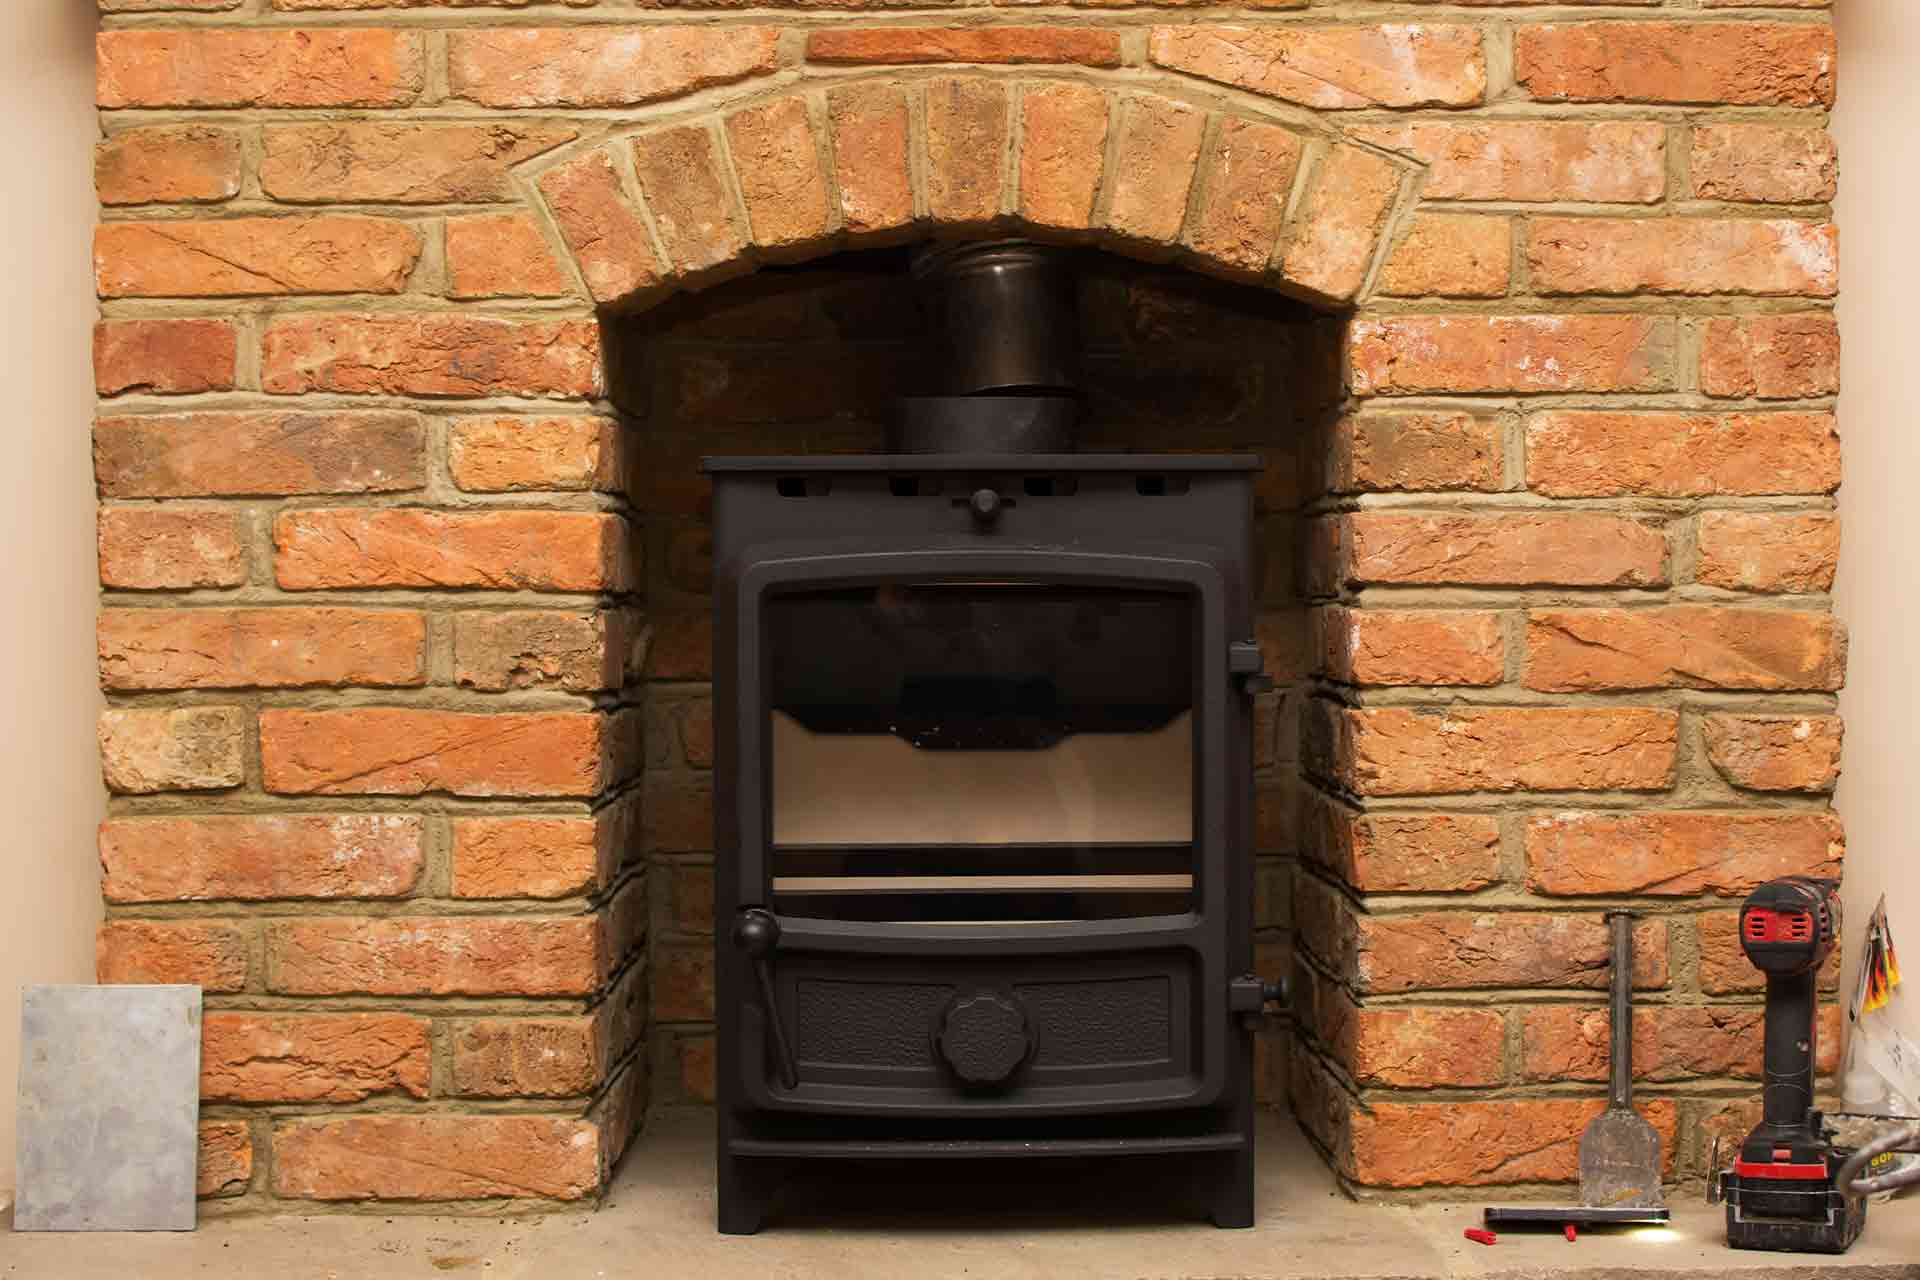 How to open up a fireplace